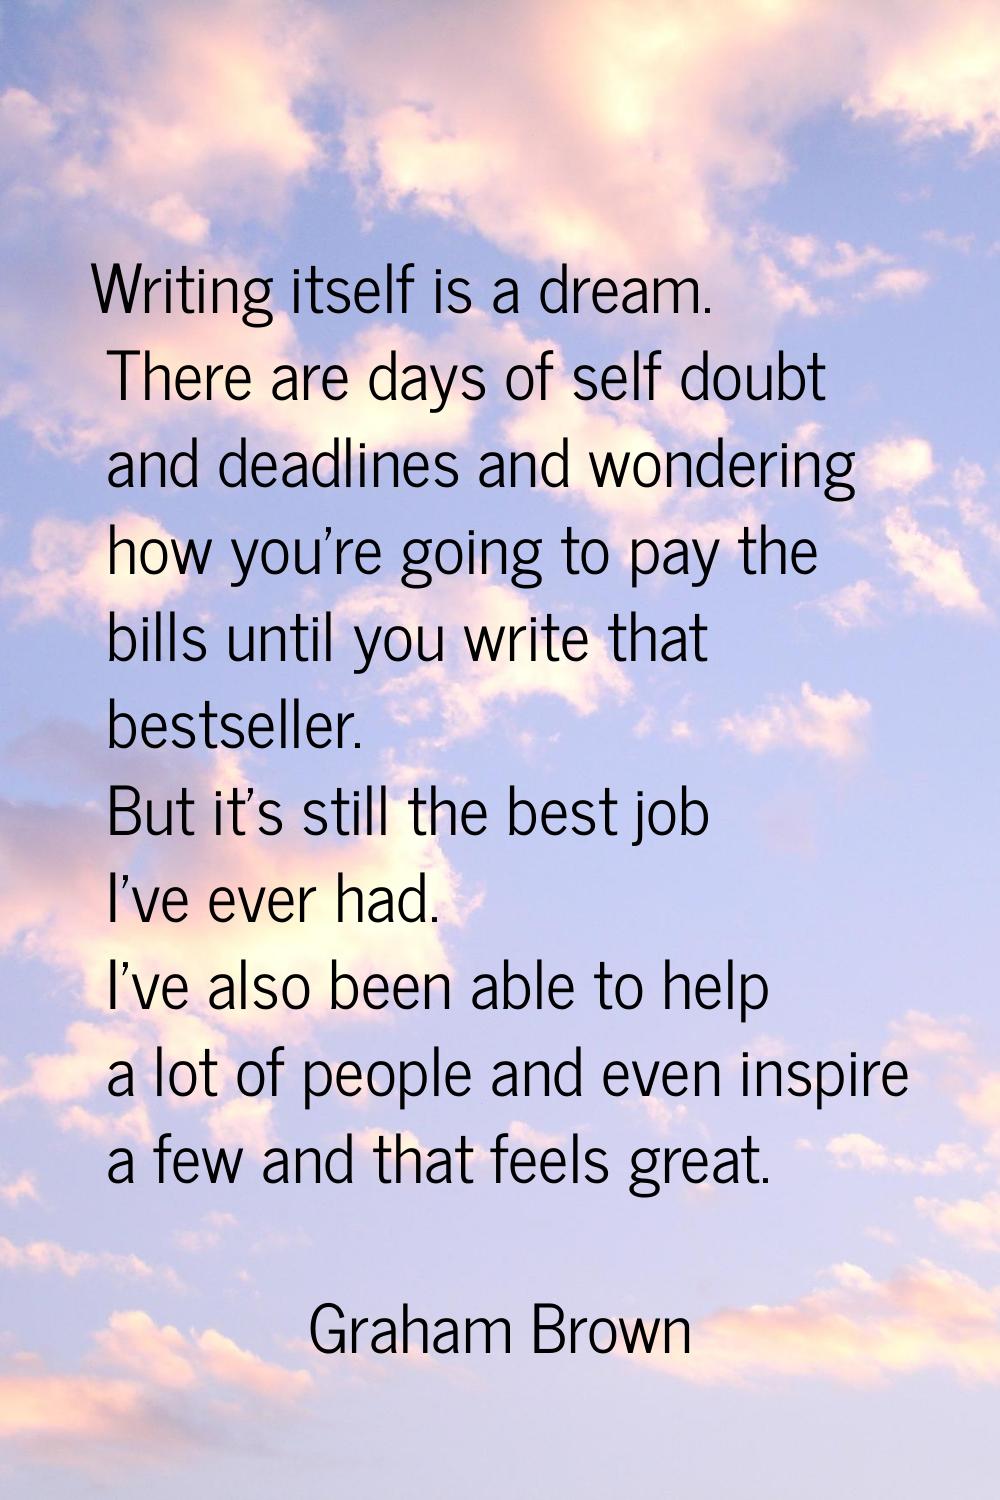 Writing itself is a dream. There are days of self doubt and deadlines and wondering how you're goin